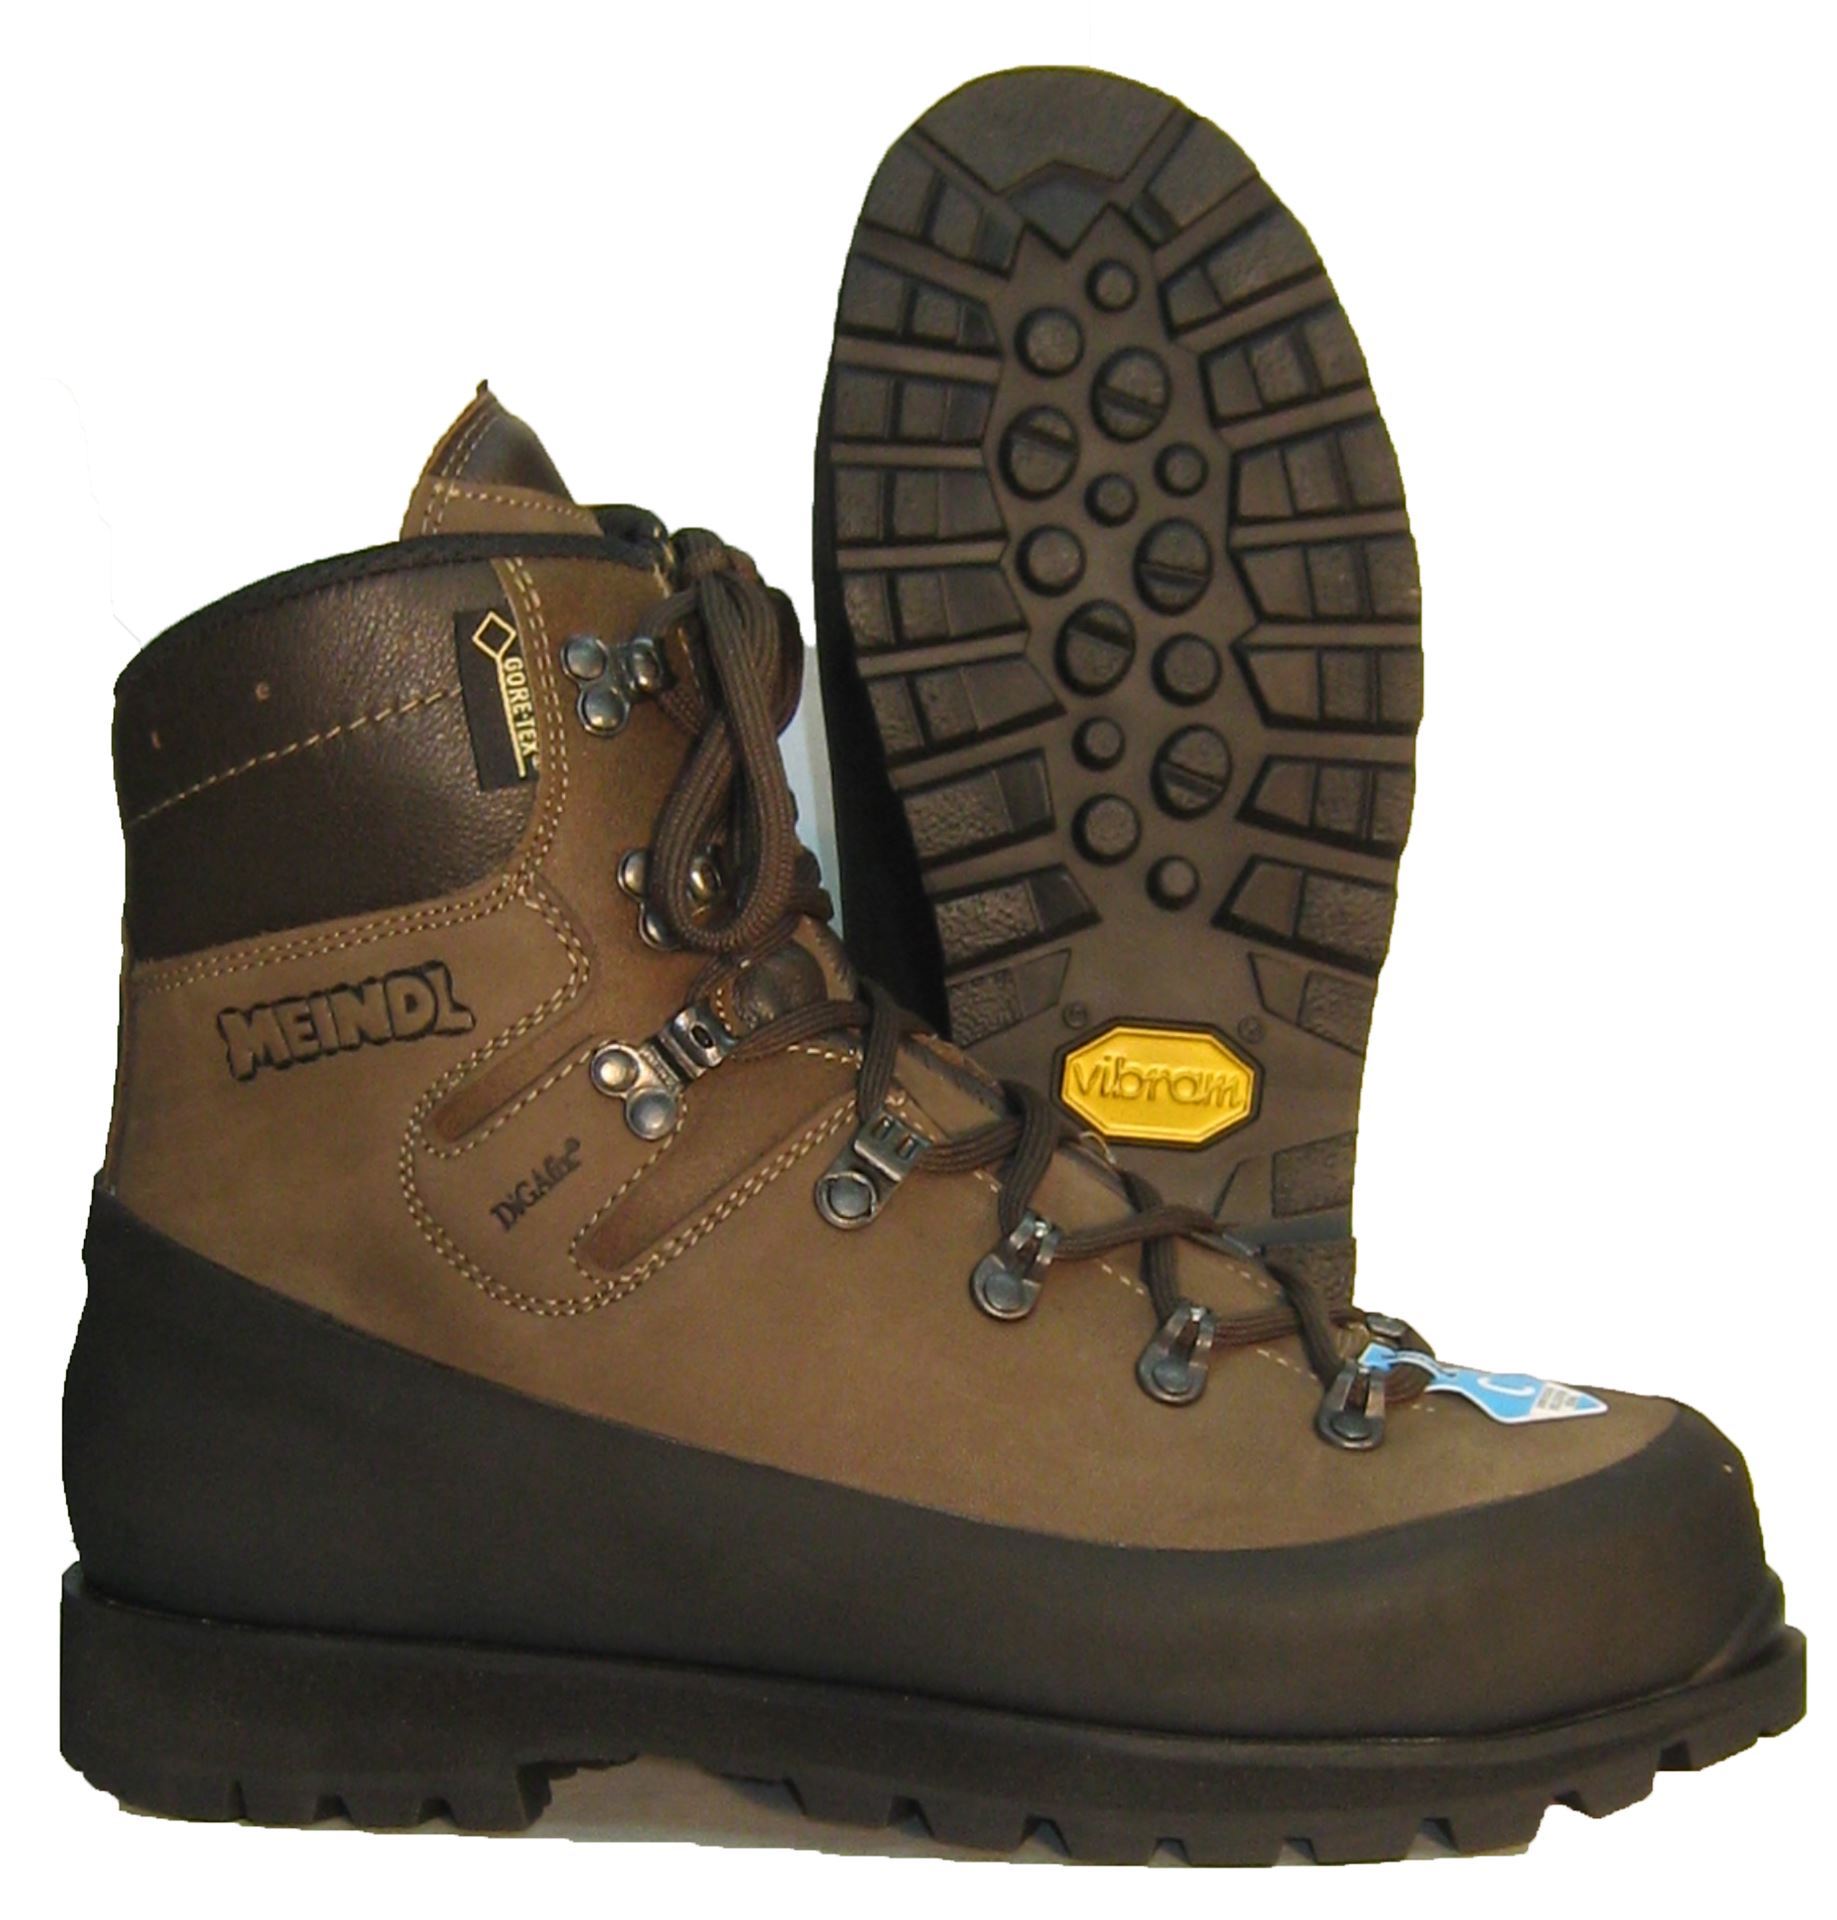 10" Meindl Lineman Boots - Hoffman - For all your Boot Needs